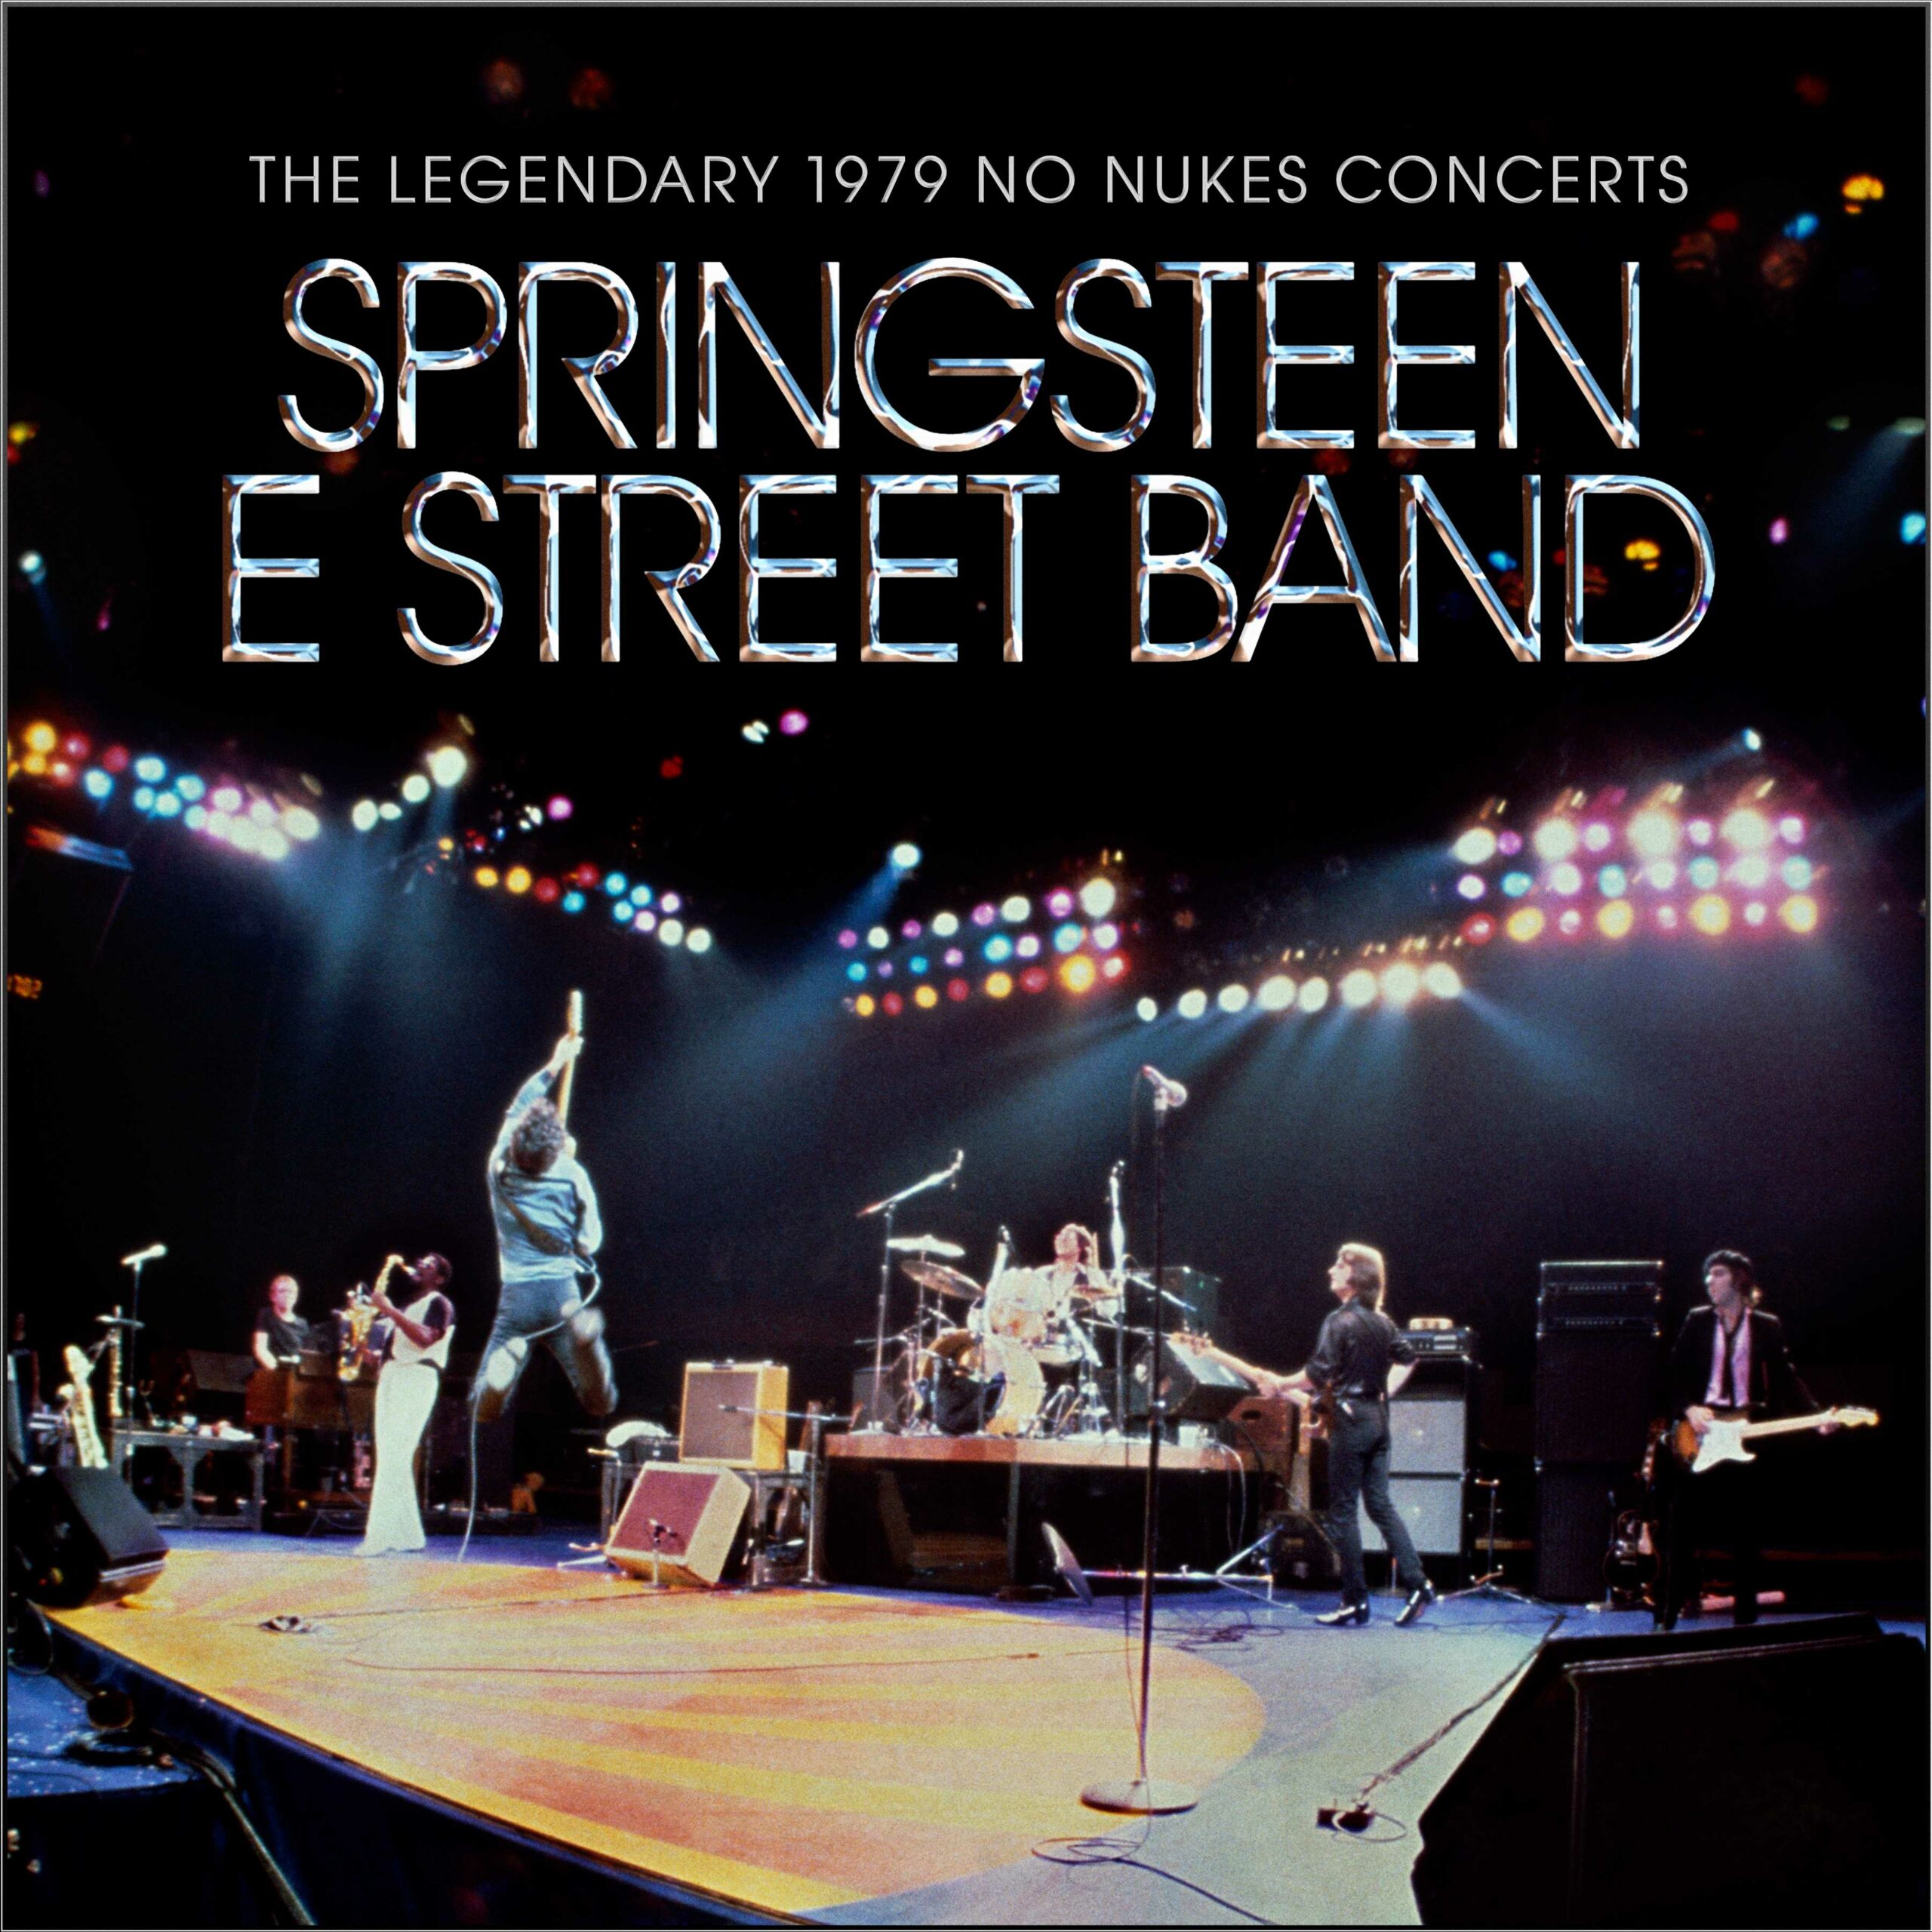 Bruce Springsteen & The E-Street Band (USA) – The Legendary 1979 No Nukes Concerts